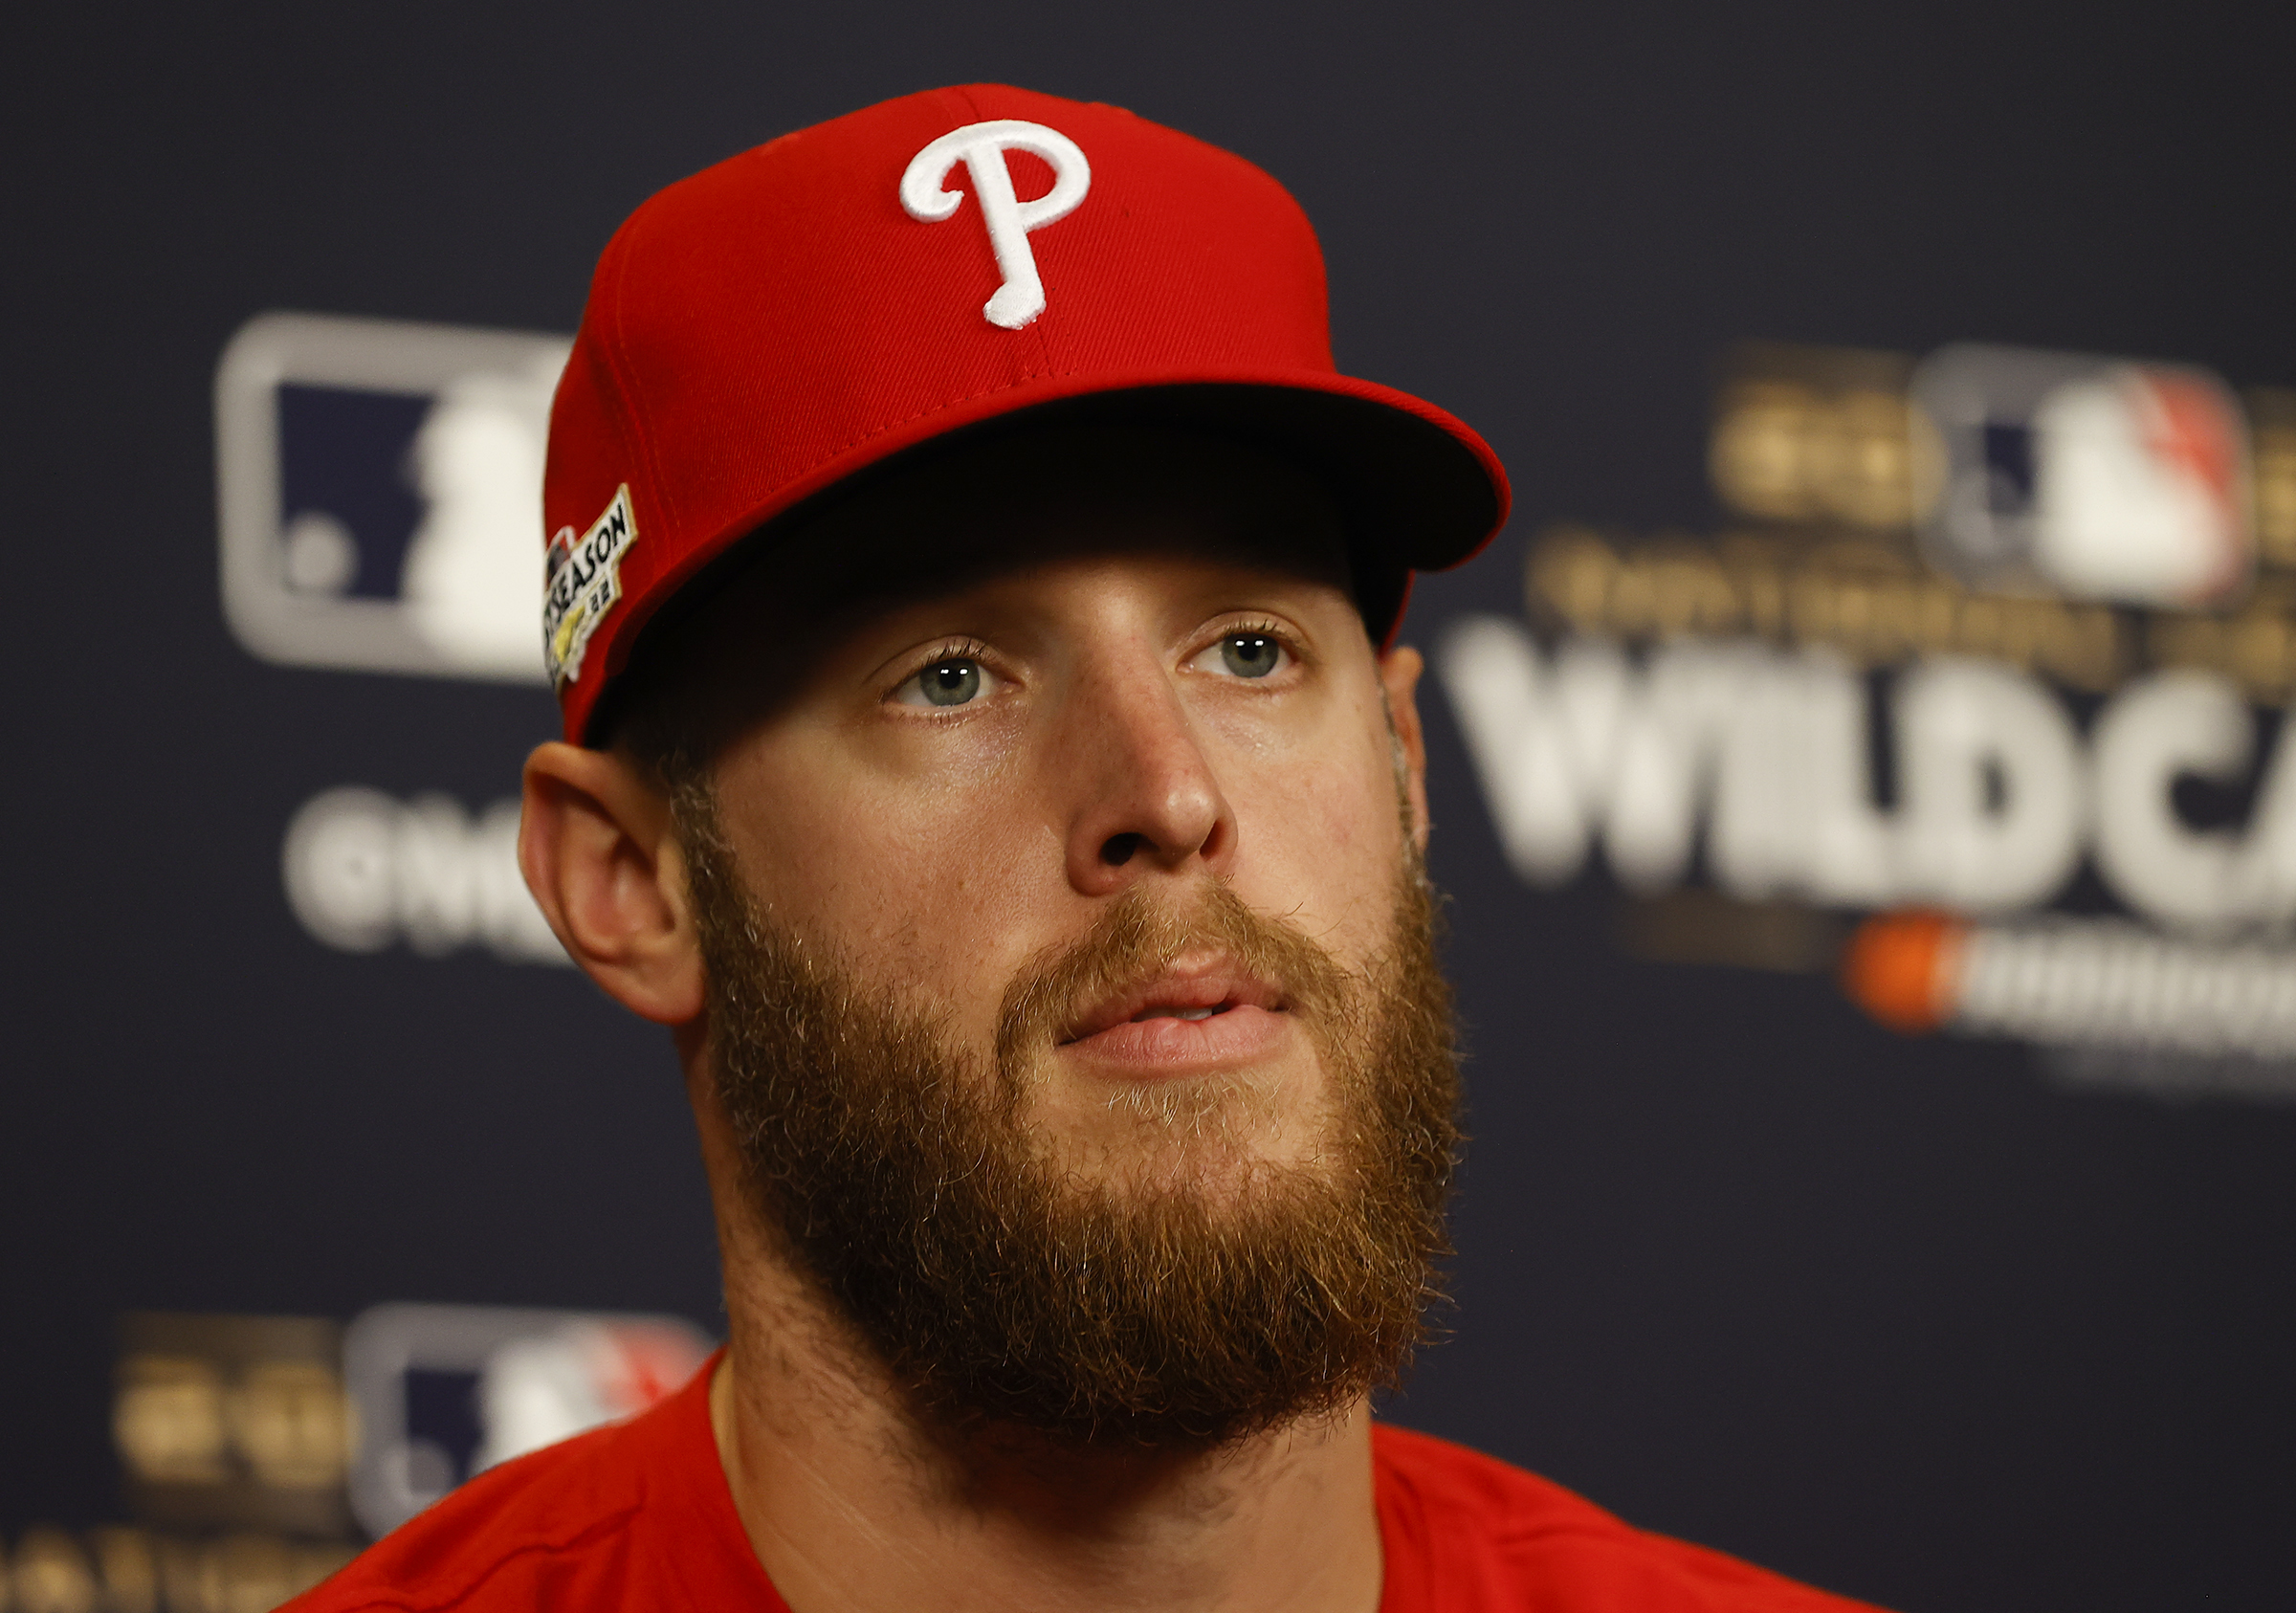 Good rest' for Phillies' Zack Wheeler appears to be a shrewd gamble